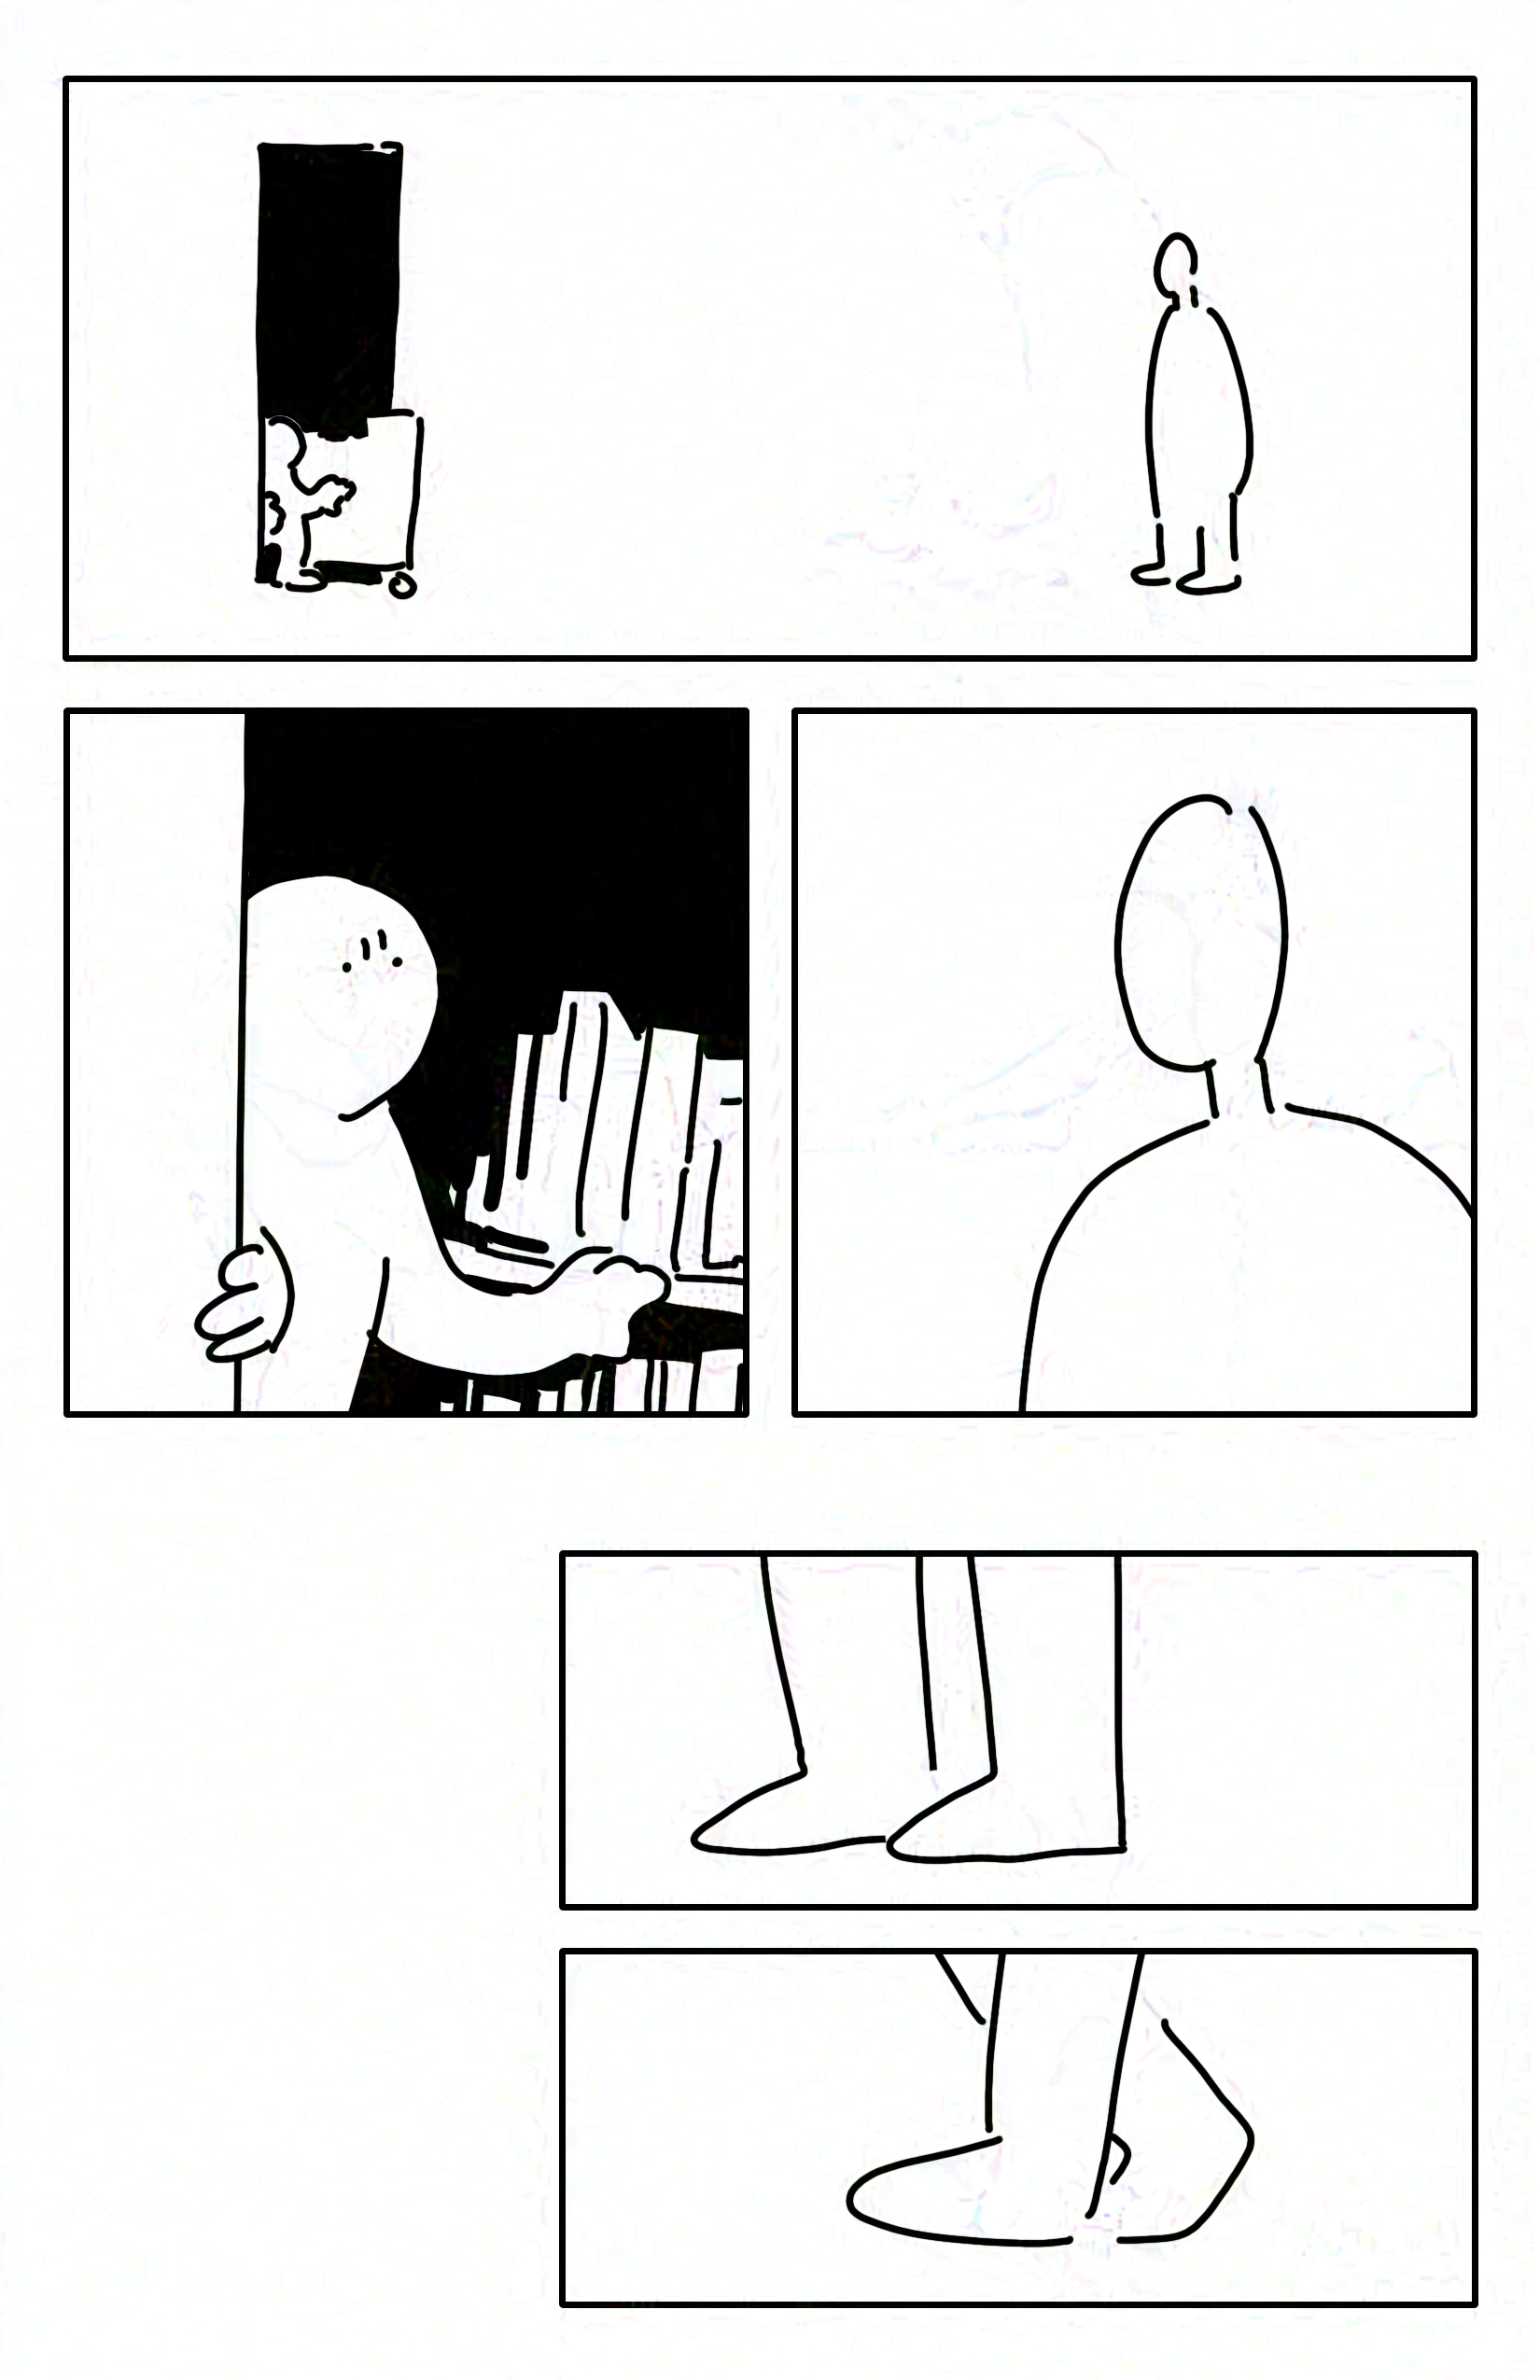 Panel 1: The two stand a distance without moving, facing each other. Panel 2: Close-up as the kid is still frozen halfway in the door, their brow is wrinkled in an unreadable expression. Panel 3: Close-up of the librarian, their face featureless. Panel 4: Close-up of the librarian's feet facing towards the kid. Panel 5: The librarian's feet take a step back.